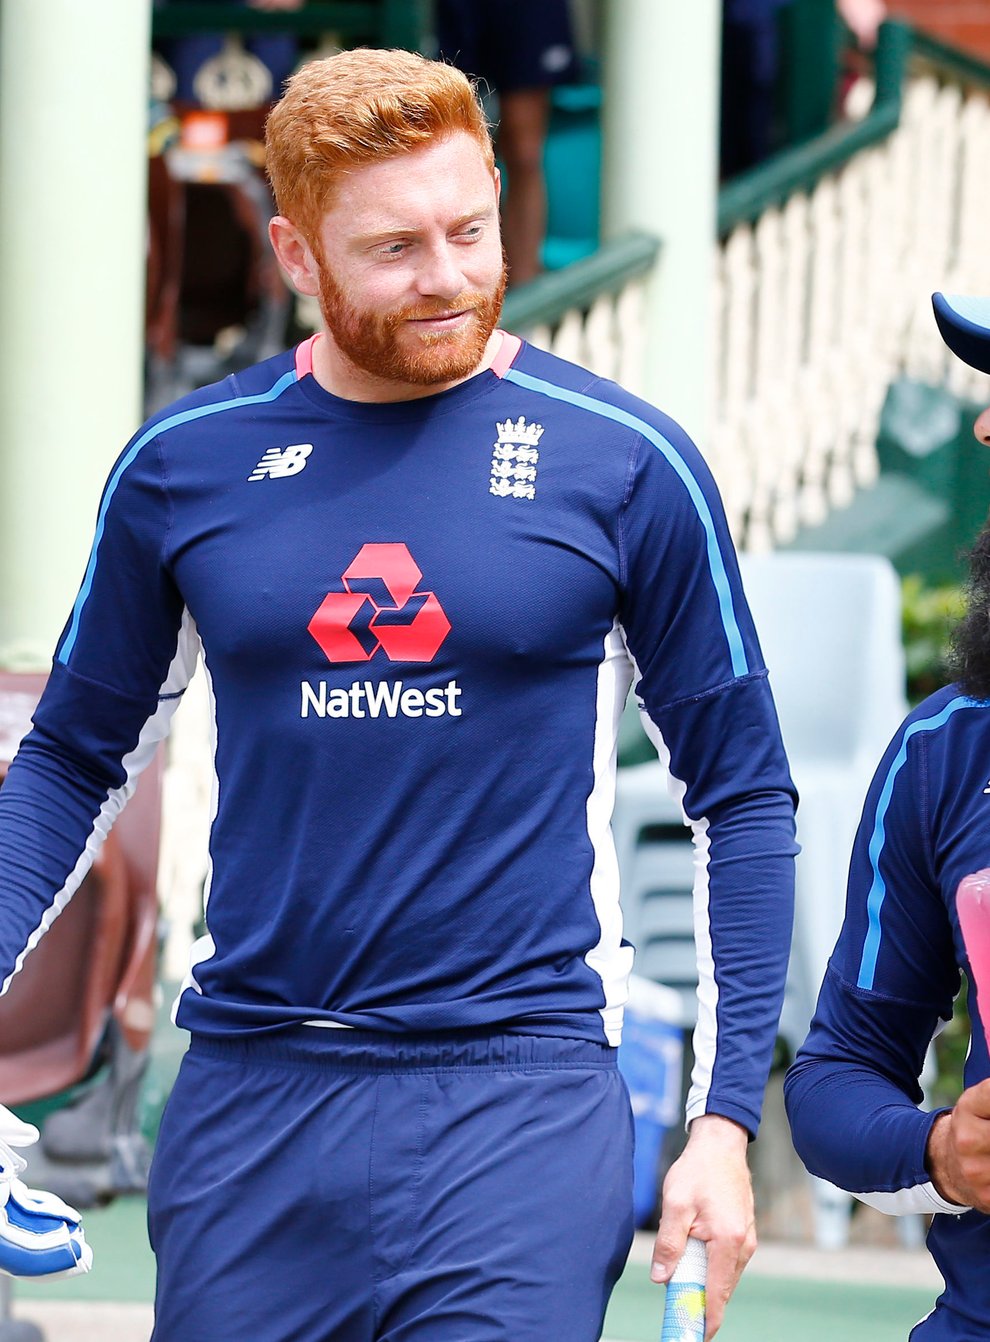 Jonny Bairstow and Moeen Ali shone with the bat in the intra-squad match